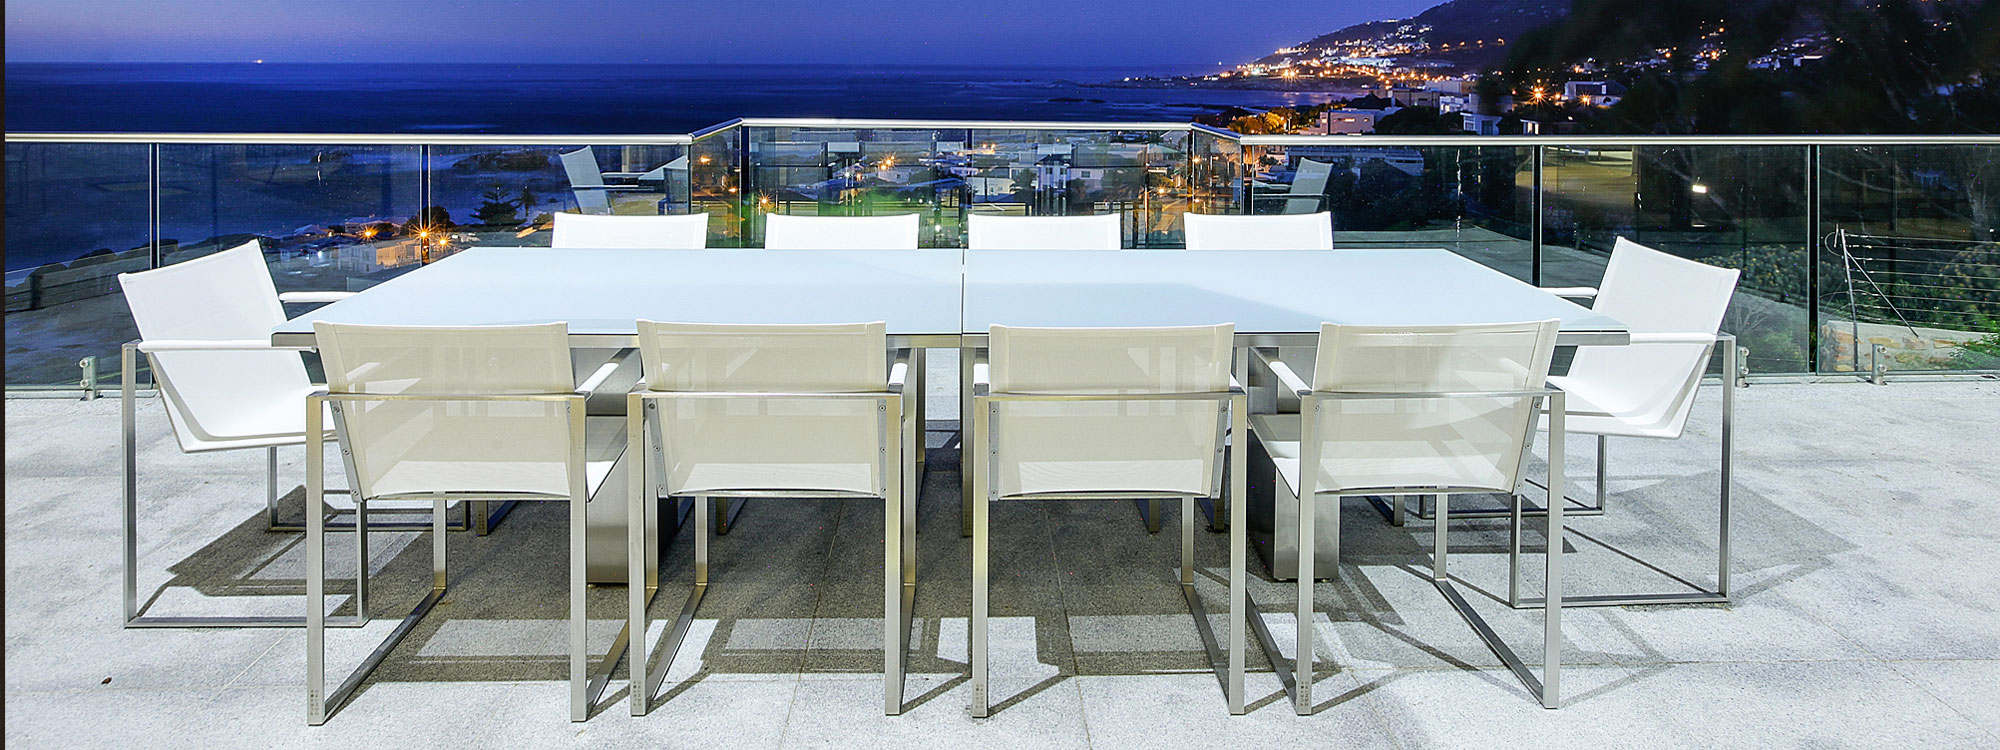 Image of Doble white and stainless steel garden table and Butaque garden chairs, shown on terrace at dusk, with coastline in the background.